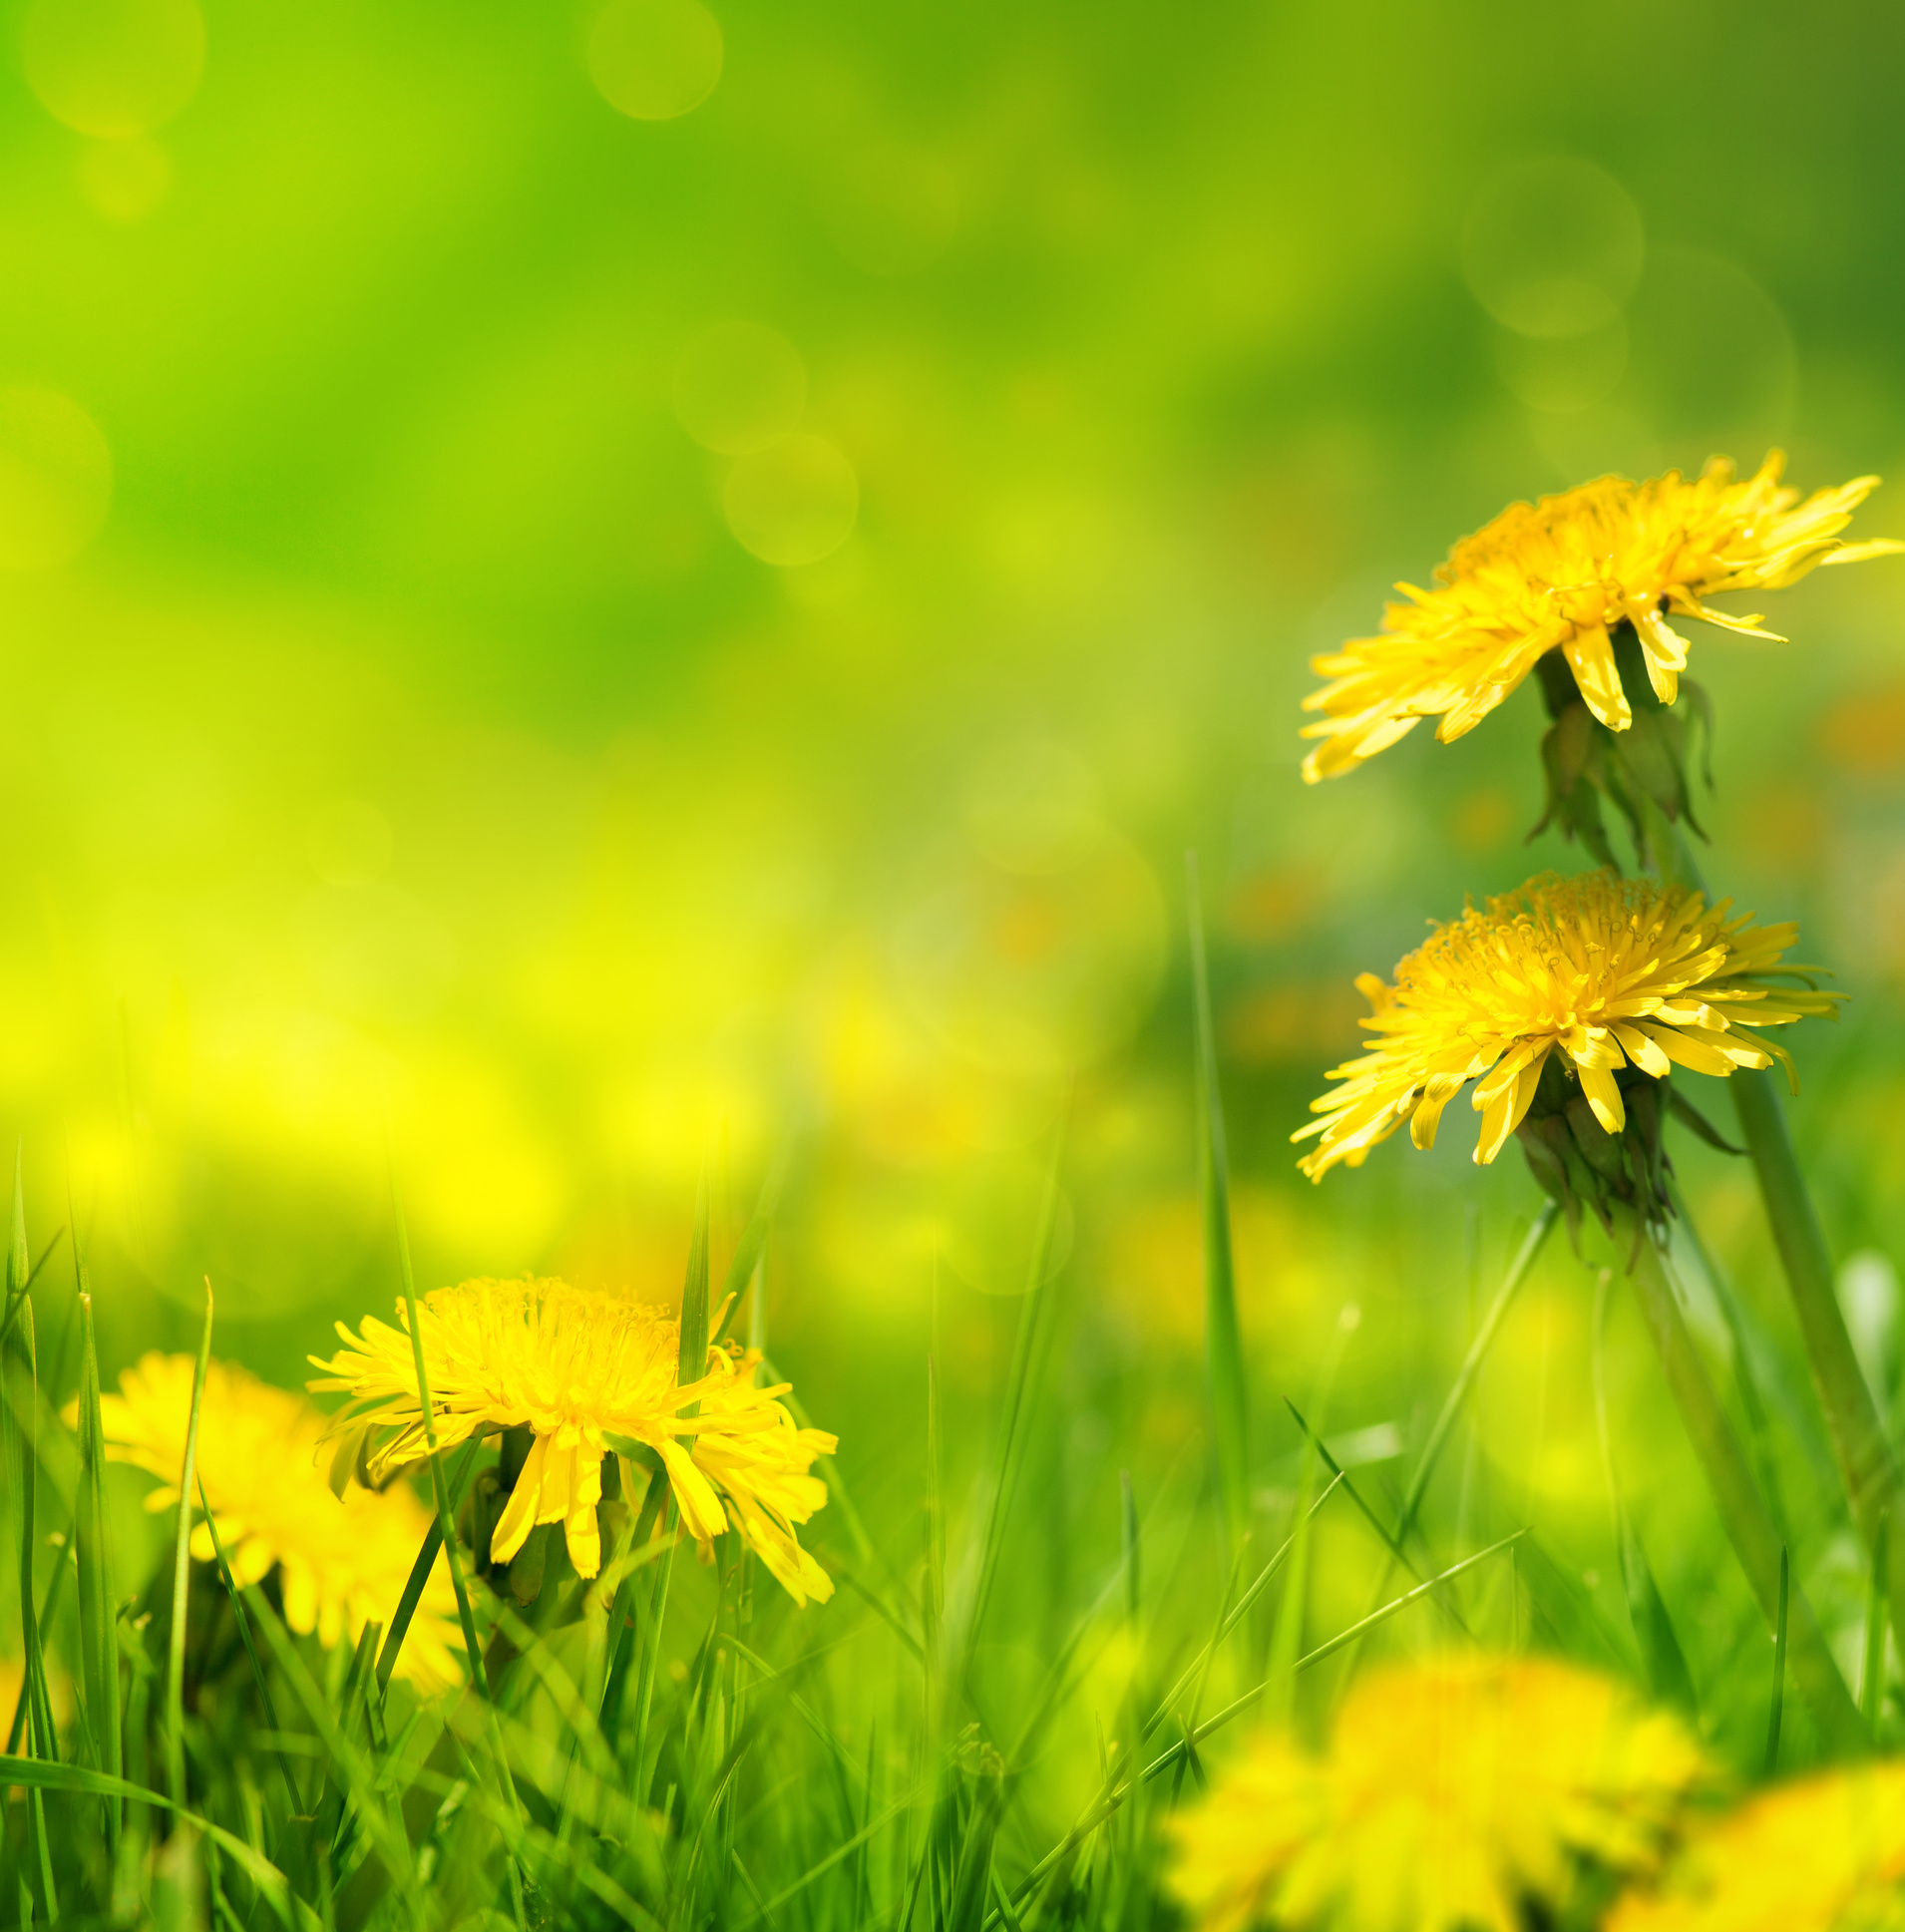 Herb of the Month: Dandelion | The Oz Blog